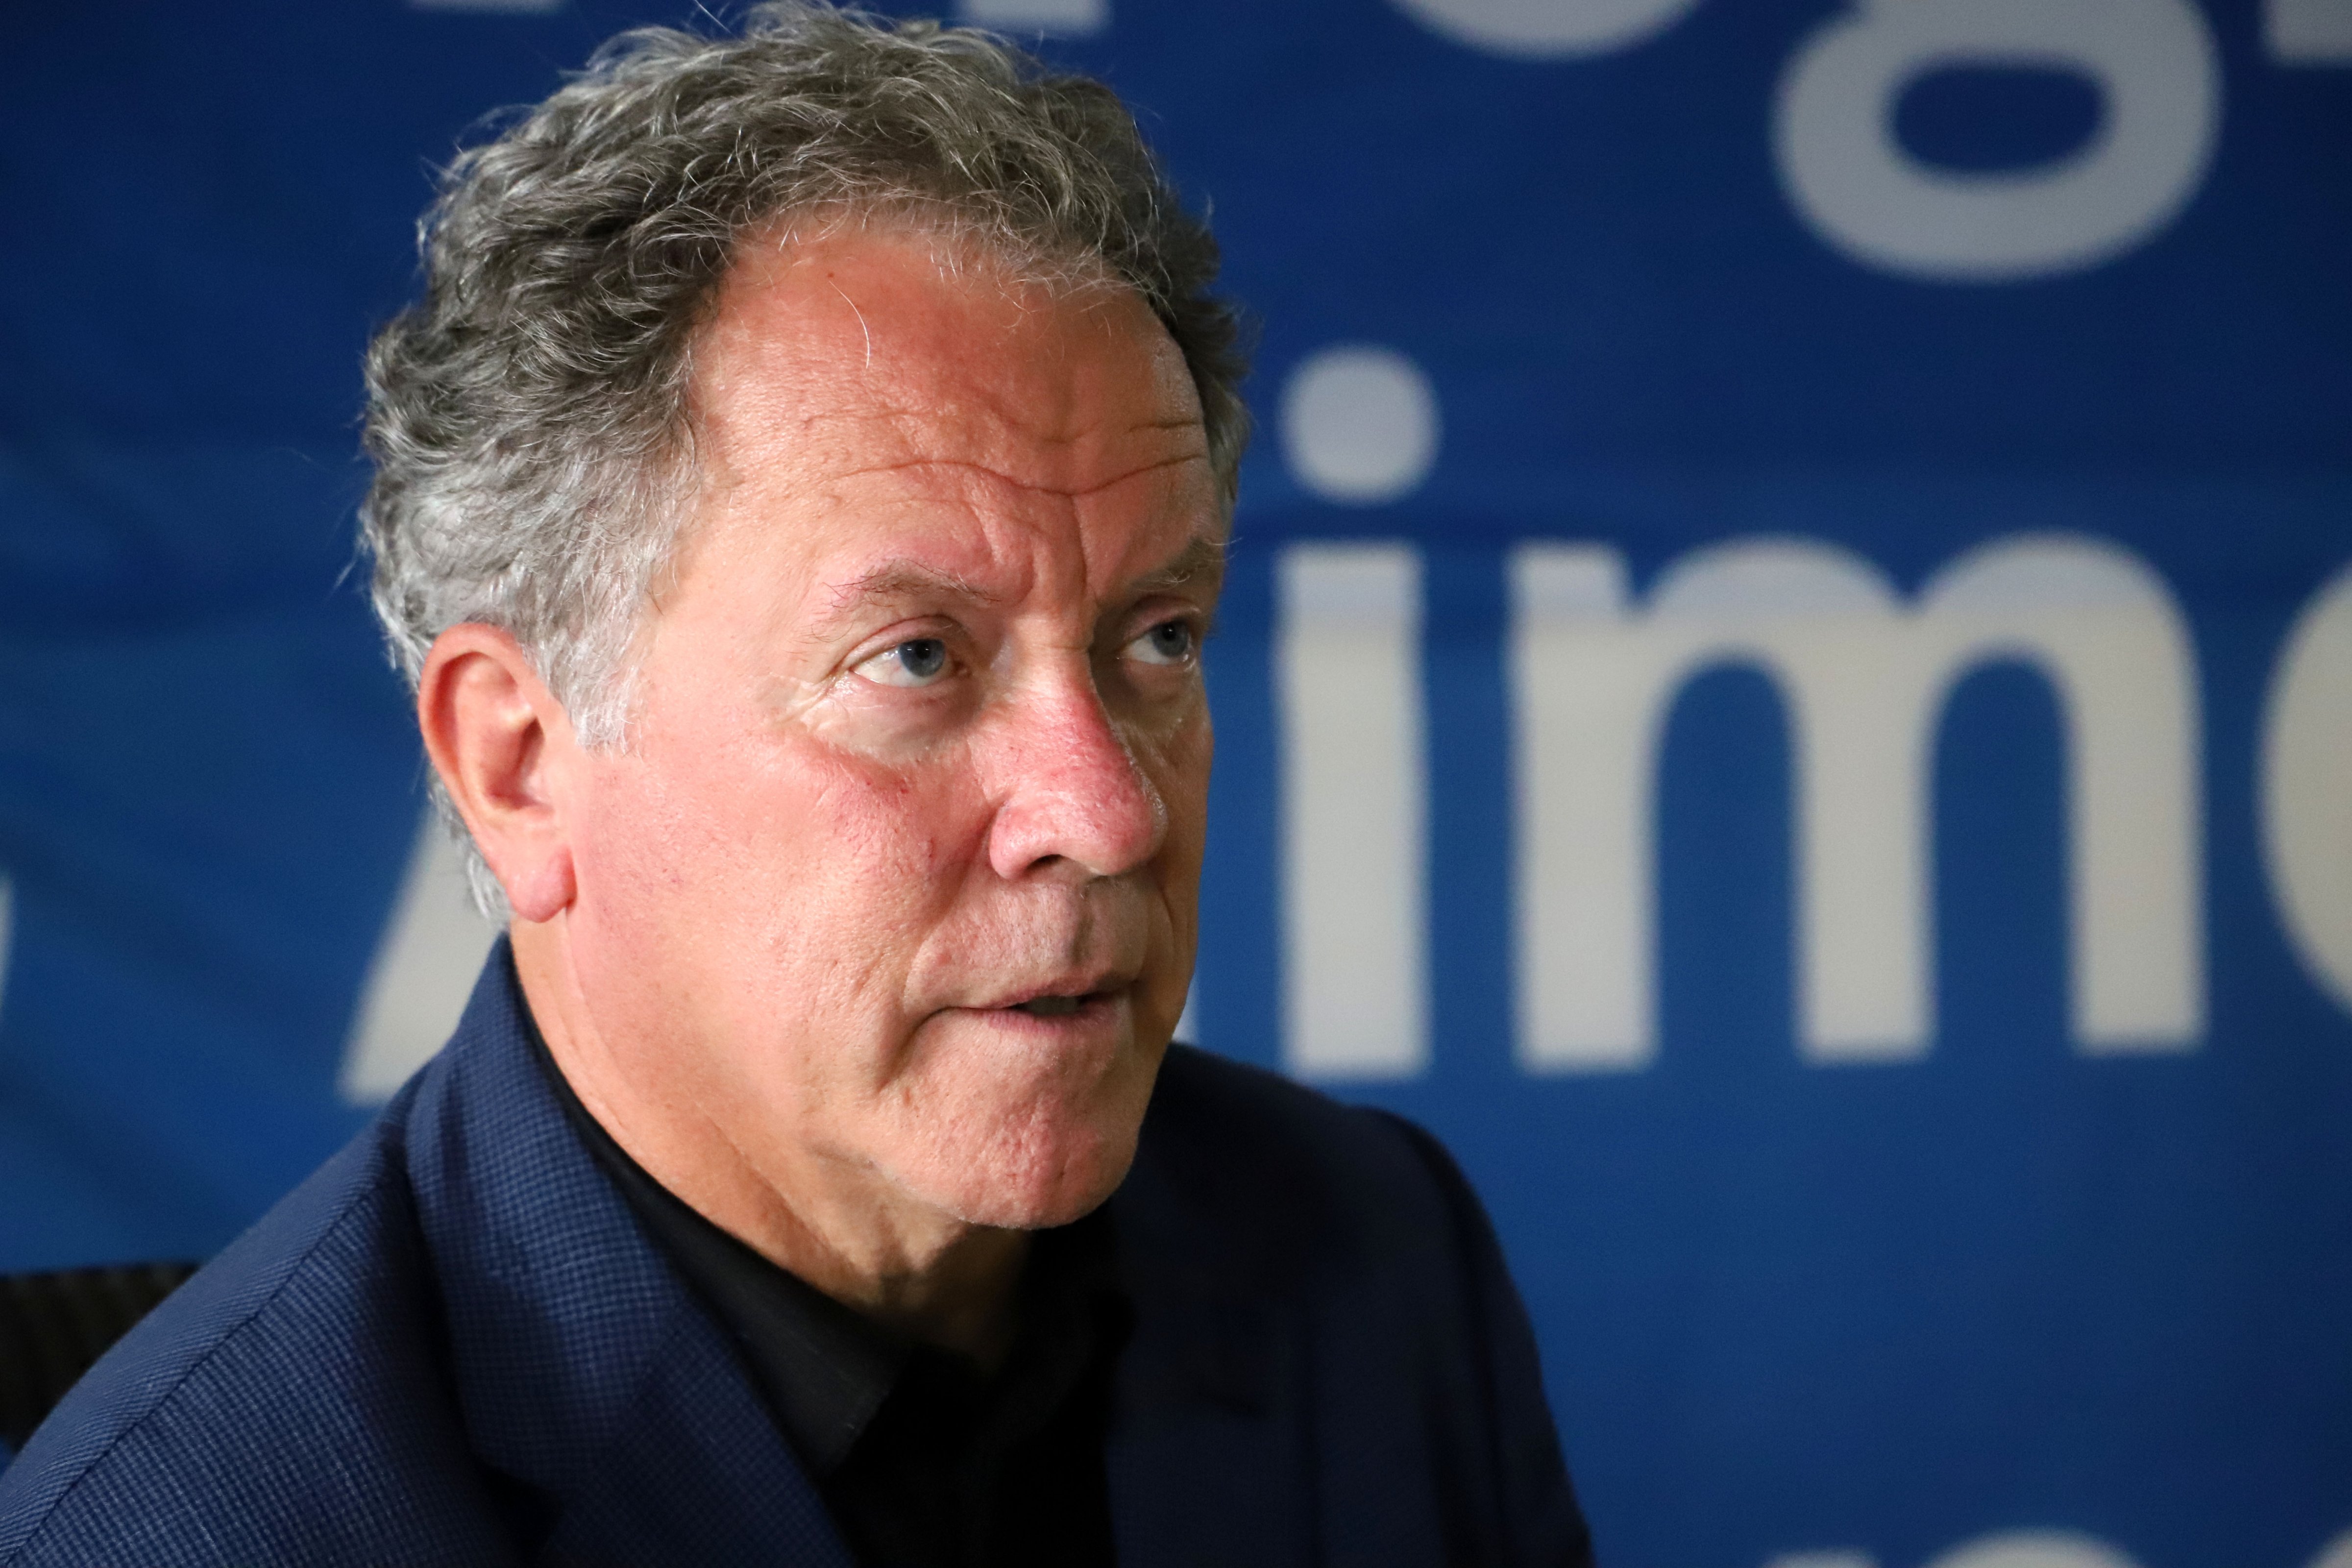 David Beasley, Executive Director of the World Food Programme (WFP), is seen at the WFP headquarters in Niamey on October 9, 2020. (Souleymane Ag Anara— AFP/Getty Images)